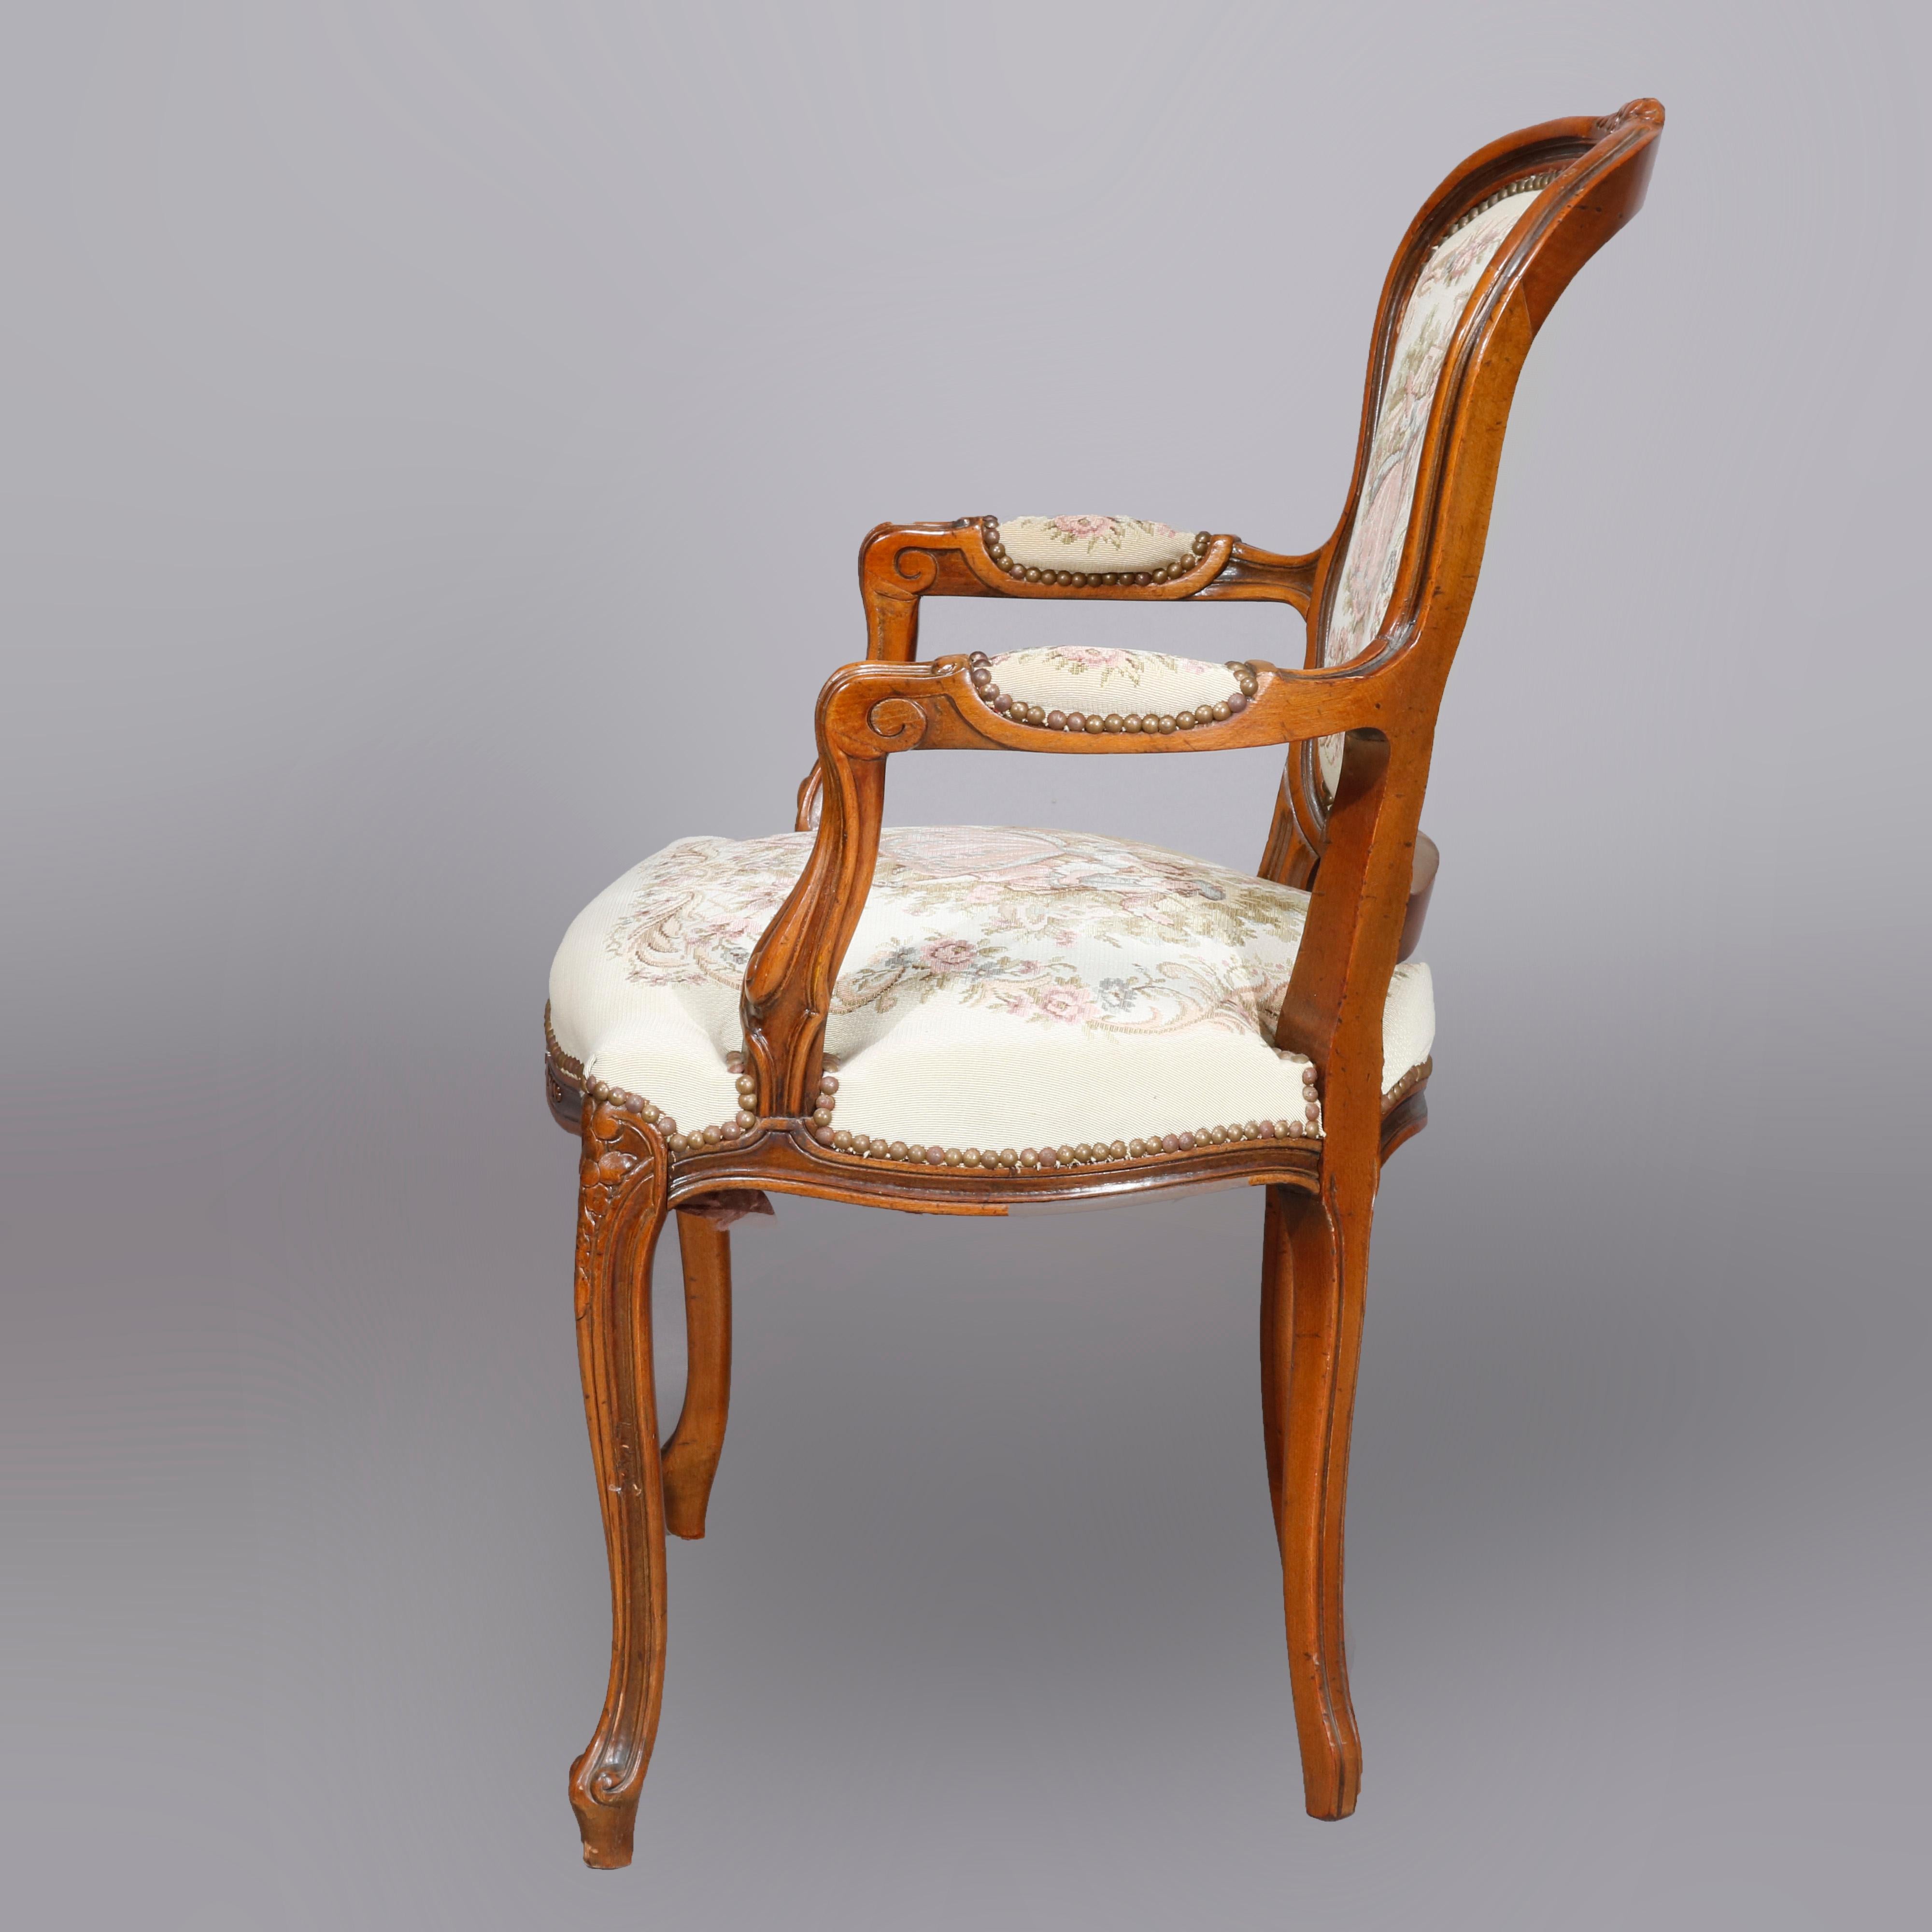 An antique French Louis XIV fauteuil armchair offers walnut construction with carved floral and scroll decoration with pictorial tapestry back and seat having courting scene in countryside setting, raised on cabriole legs terminating in scroll feet,